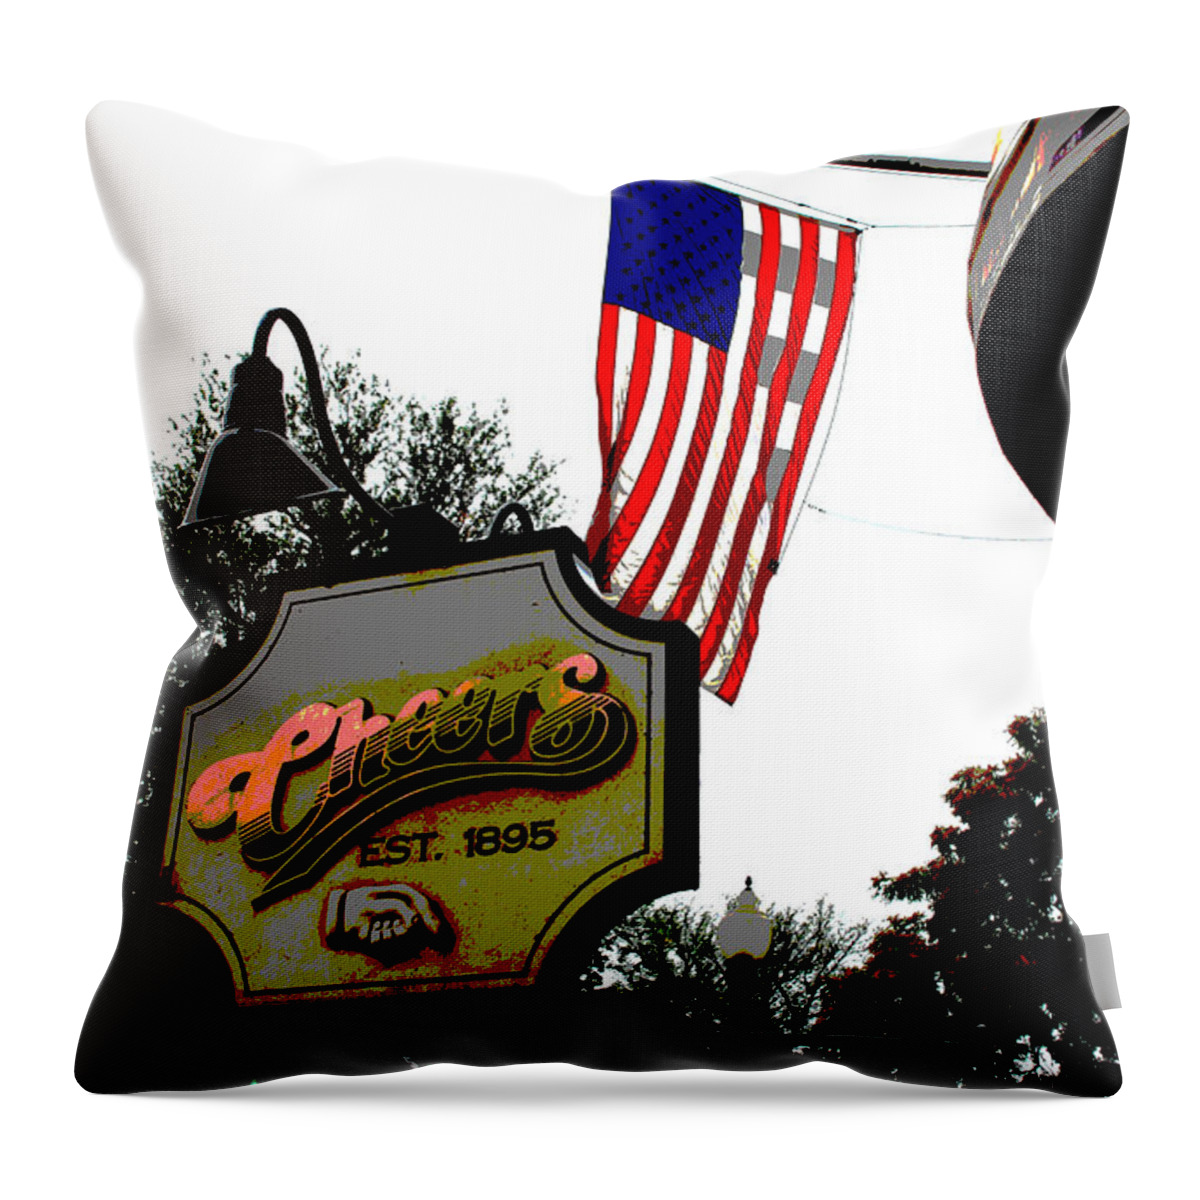 Cheers Throw Pillow featuring the photograph Walking through Boston 4 - Cheers Sign by Norma Brock